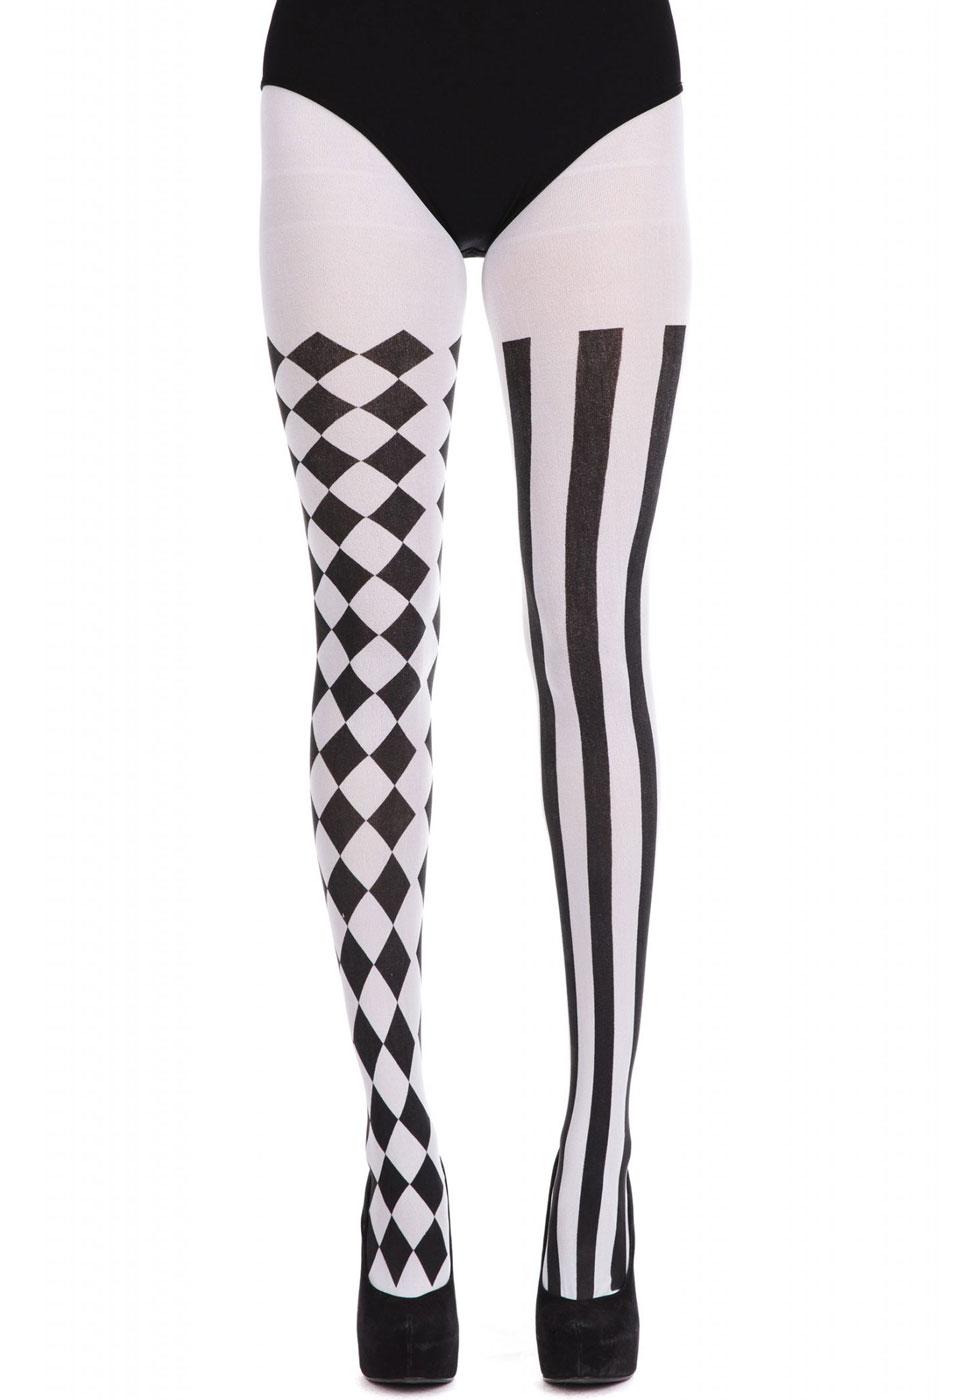 Harlequin Tights Black and White by Bristol Novelties BA998 available here at Karnival Costumes online party shop